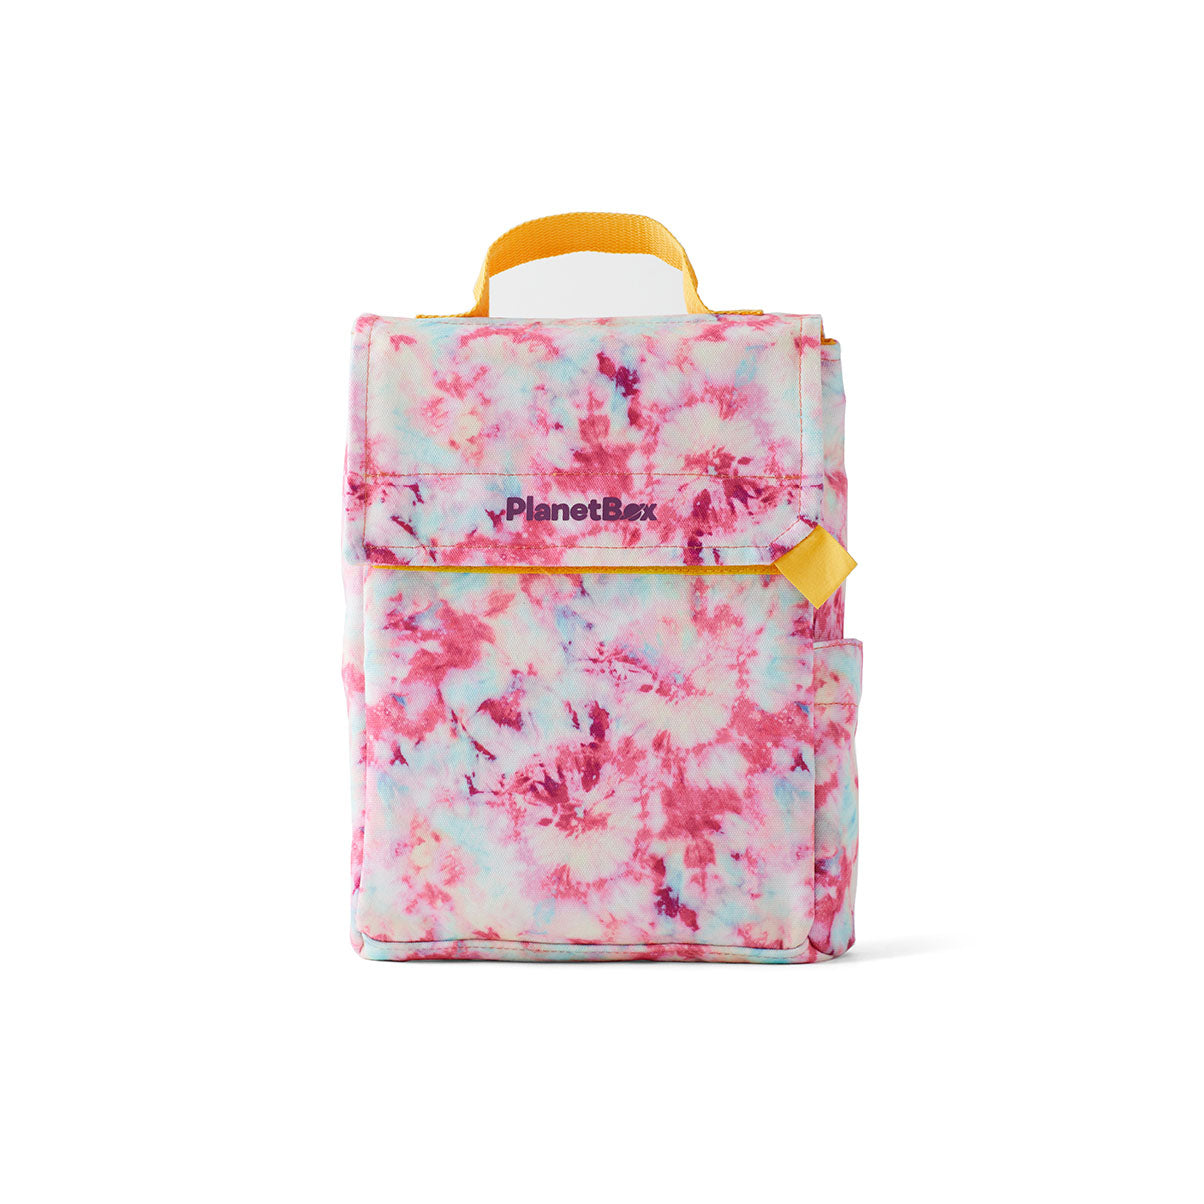 PlanetBox Lunch Sack: Blossom Tie Dye Lunch Bag by PlanetBox | Cute Kid Stuff